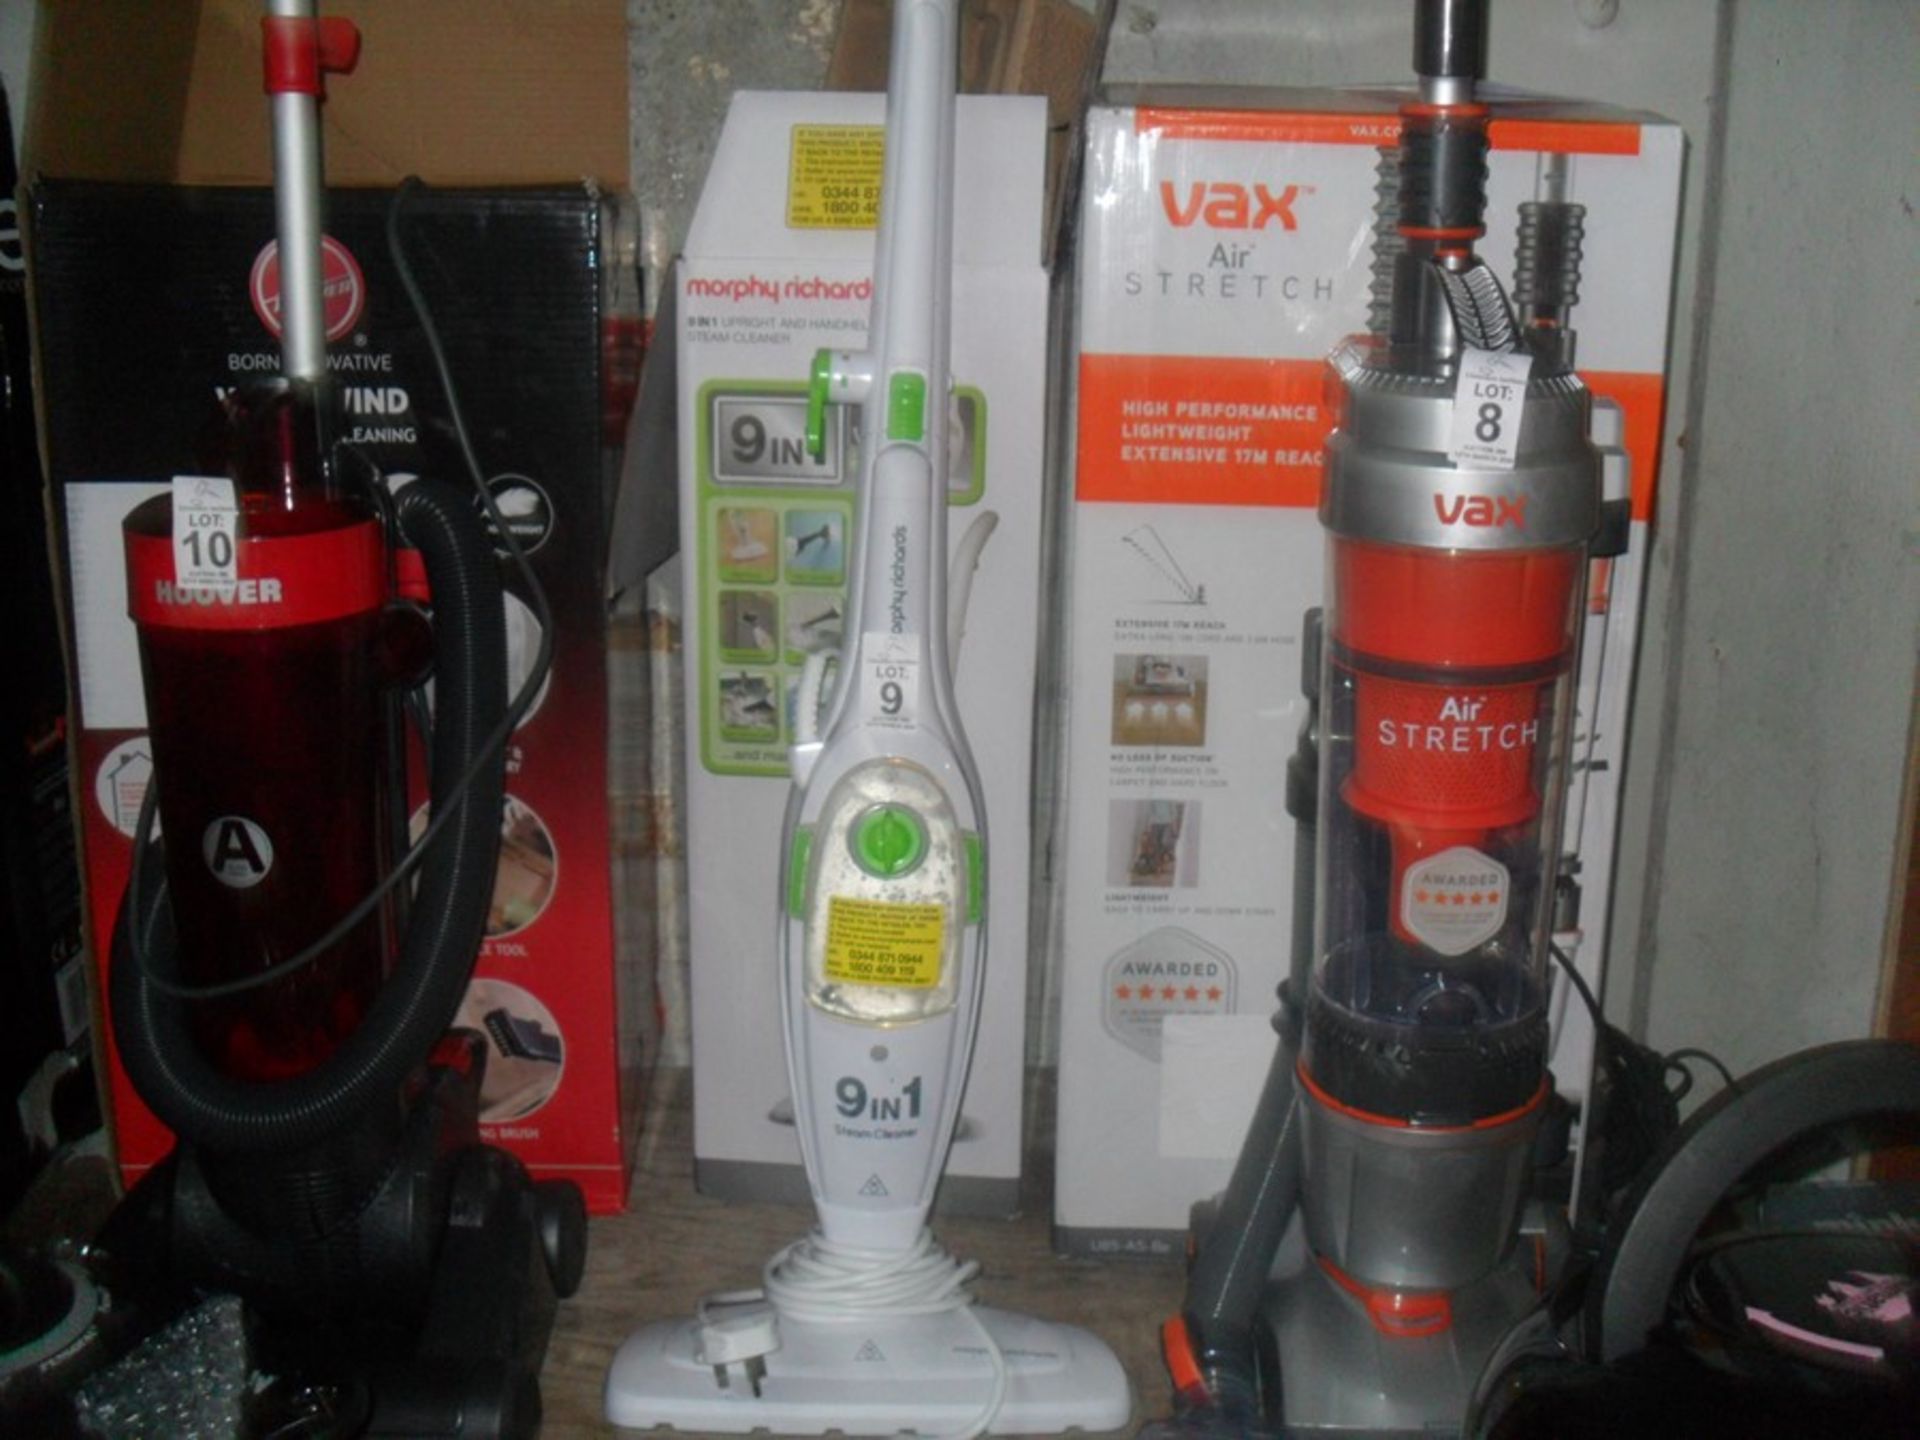 MORPHY RICHARDS STEAM CLEANER (SHOP CLEARANCE)